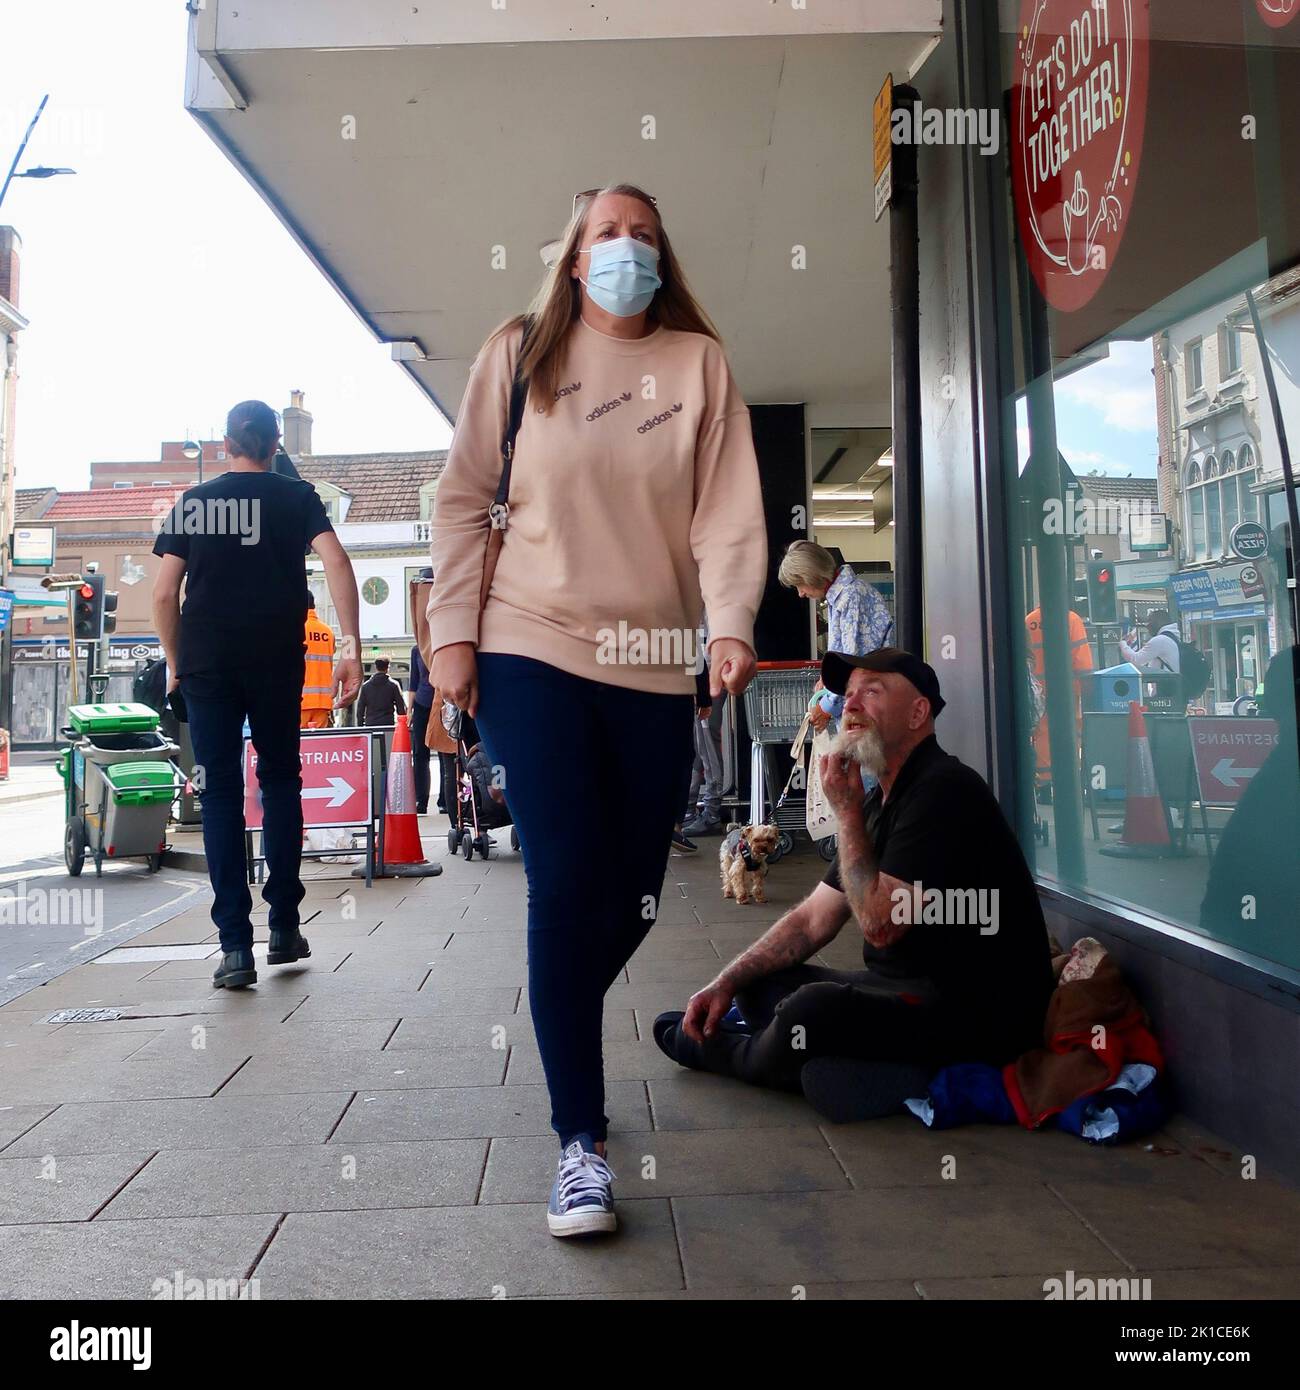 Ipswich, Suffolk, UK - 17 September 2022 :A woman wearing a mask walks past a beggar seated on the ground outside a supermarket. The beggar is asking for spare change. The woman ignores him. Stock Photo